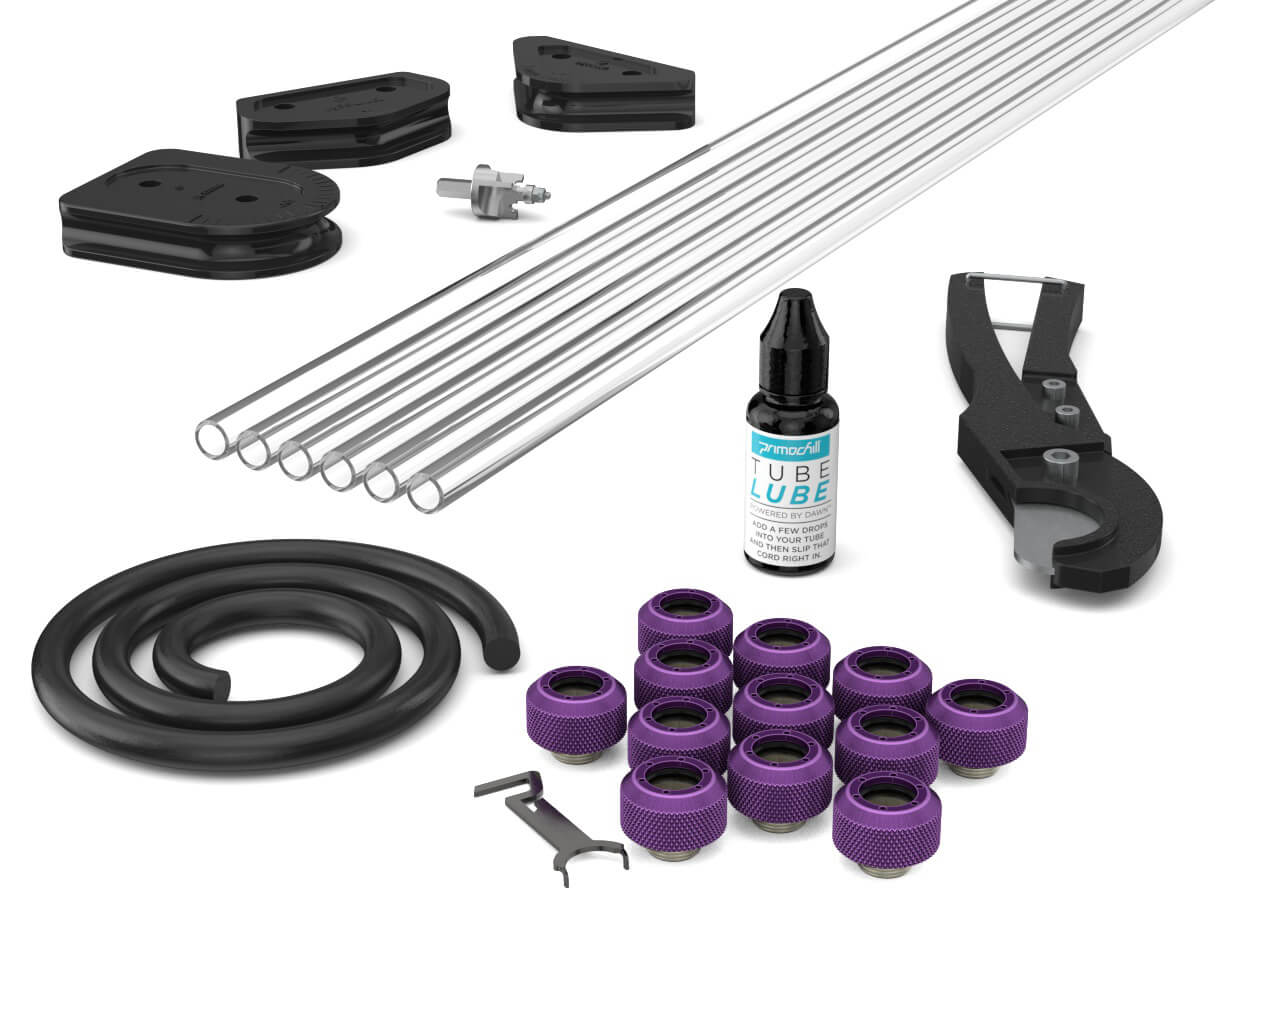 PrimoChill Complete 1/2 Inch PETG / RSX Combo Pack - PrimoChill - KEEPING IT COOL Candy Purple